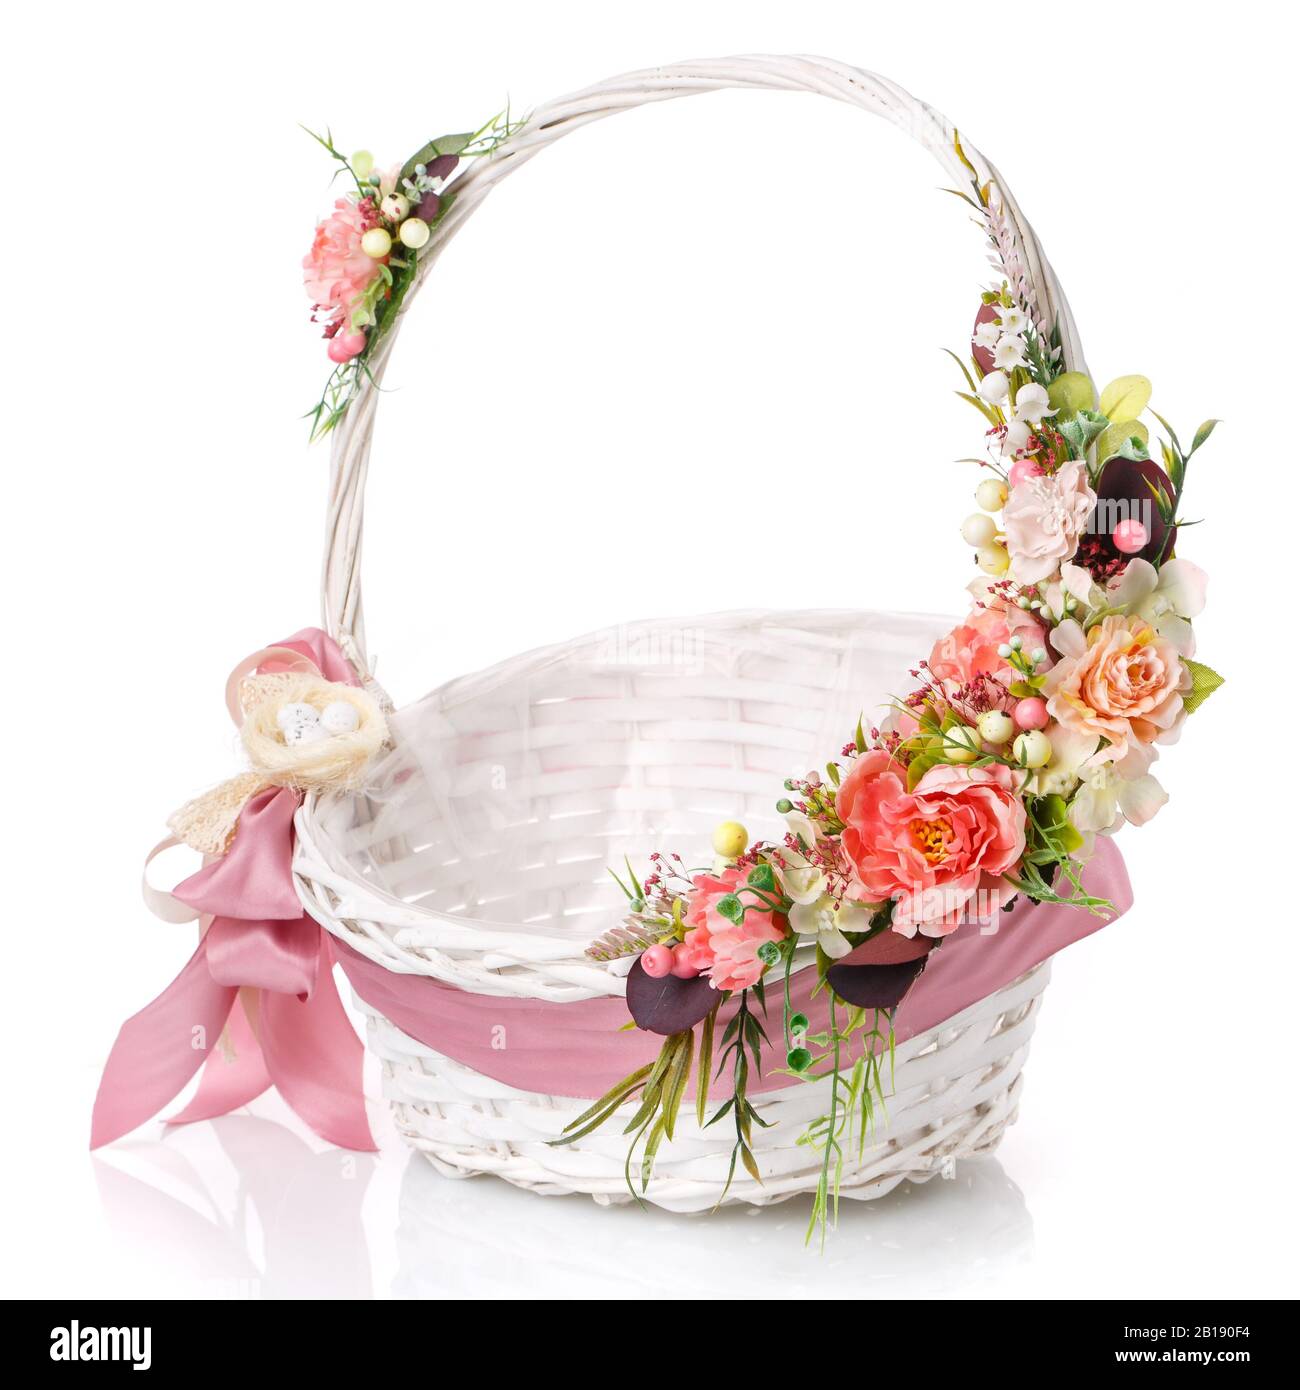 Wicker design baskets are decorated with a floral arrangement for Easter  Stock Photo - Alamy